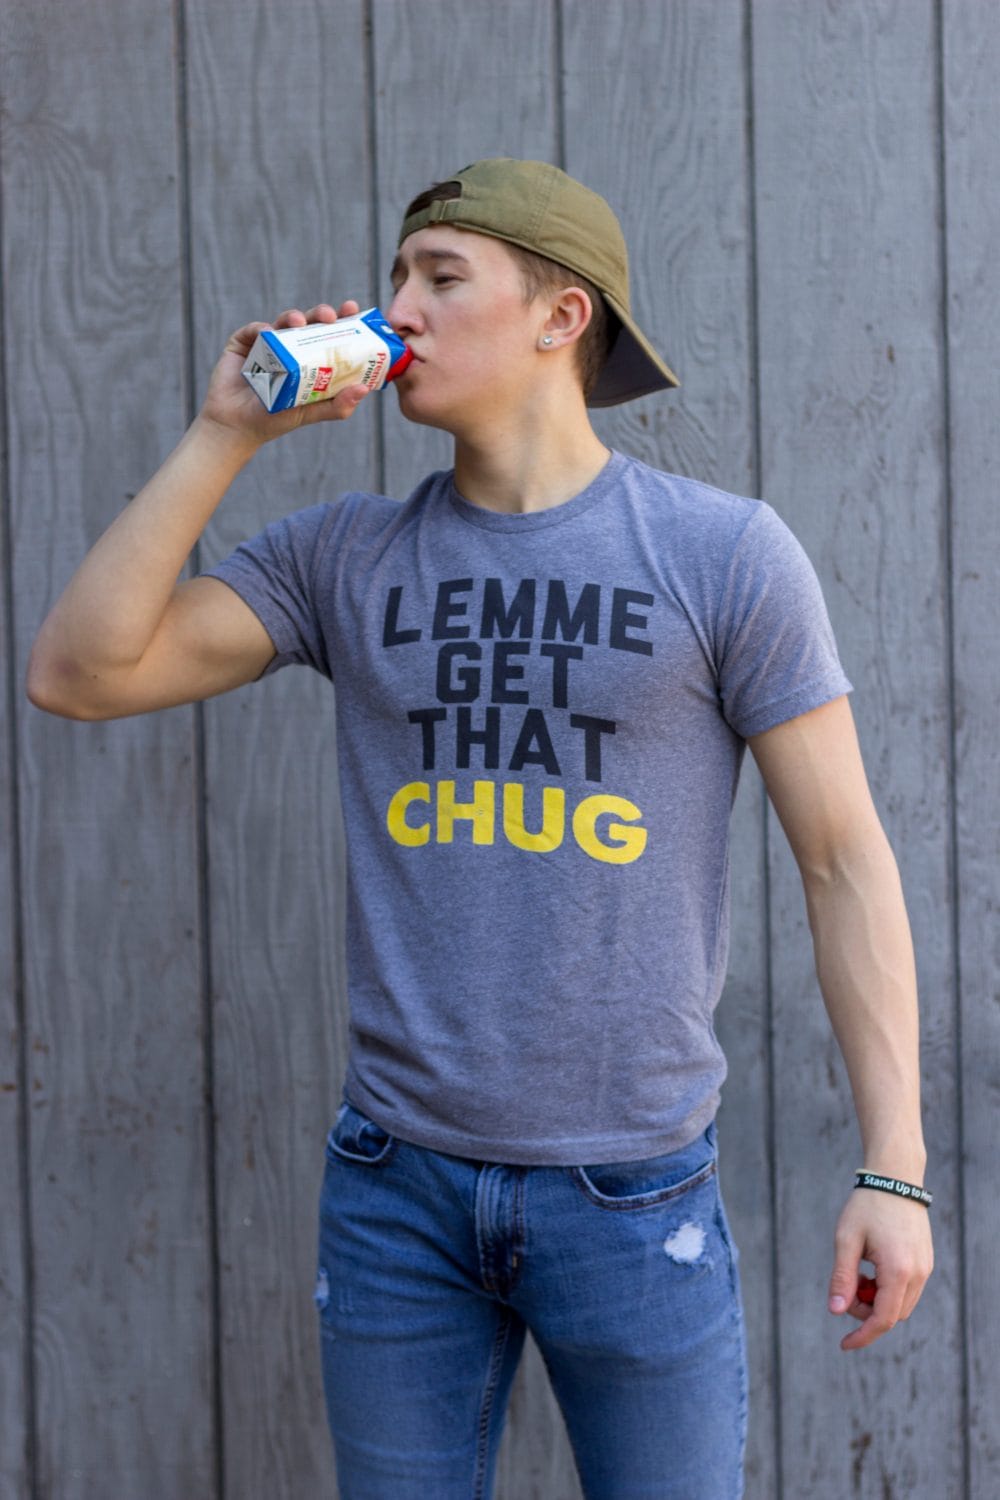 Funny Gaming T-Shirts Based on Things Said in Fortnite "Lemme Get That Chug"